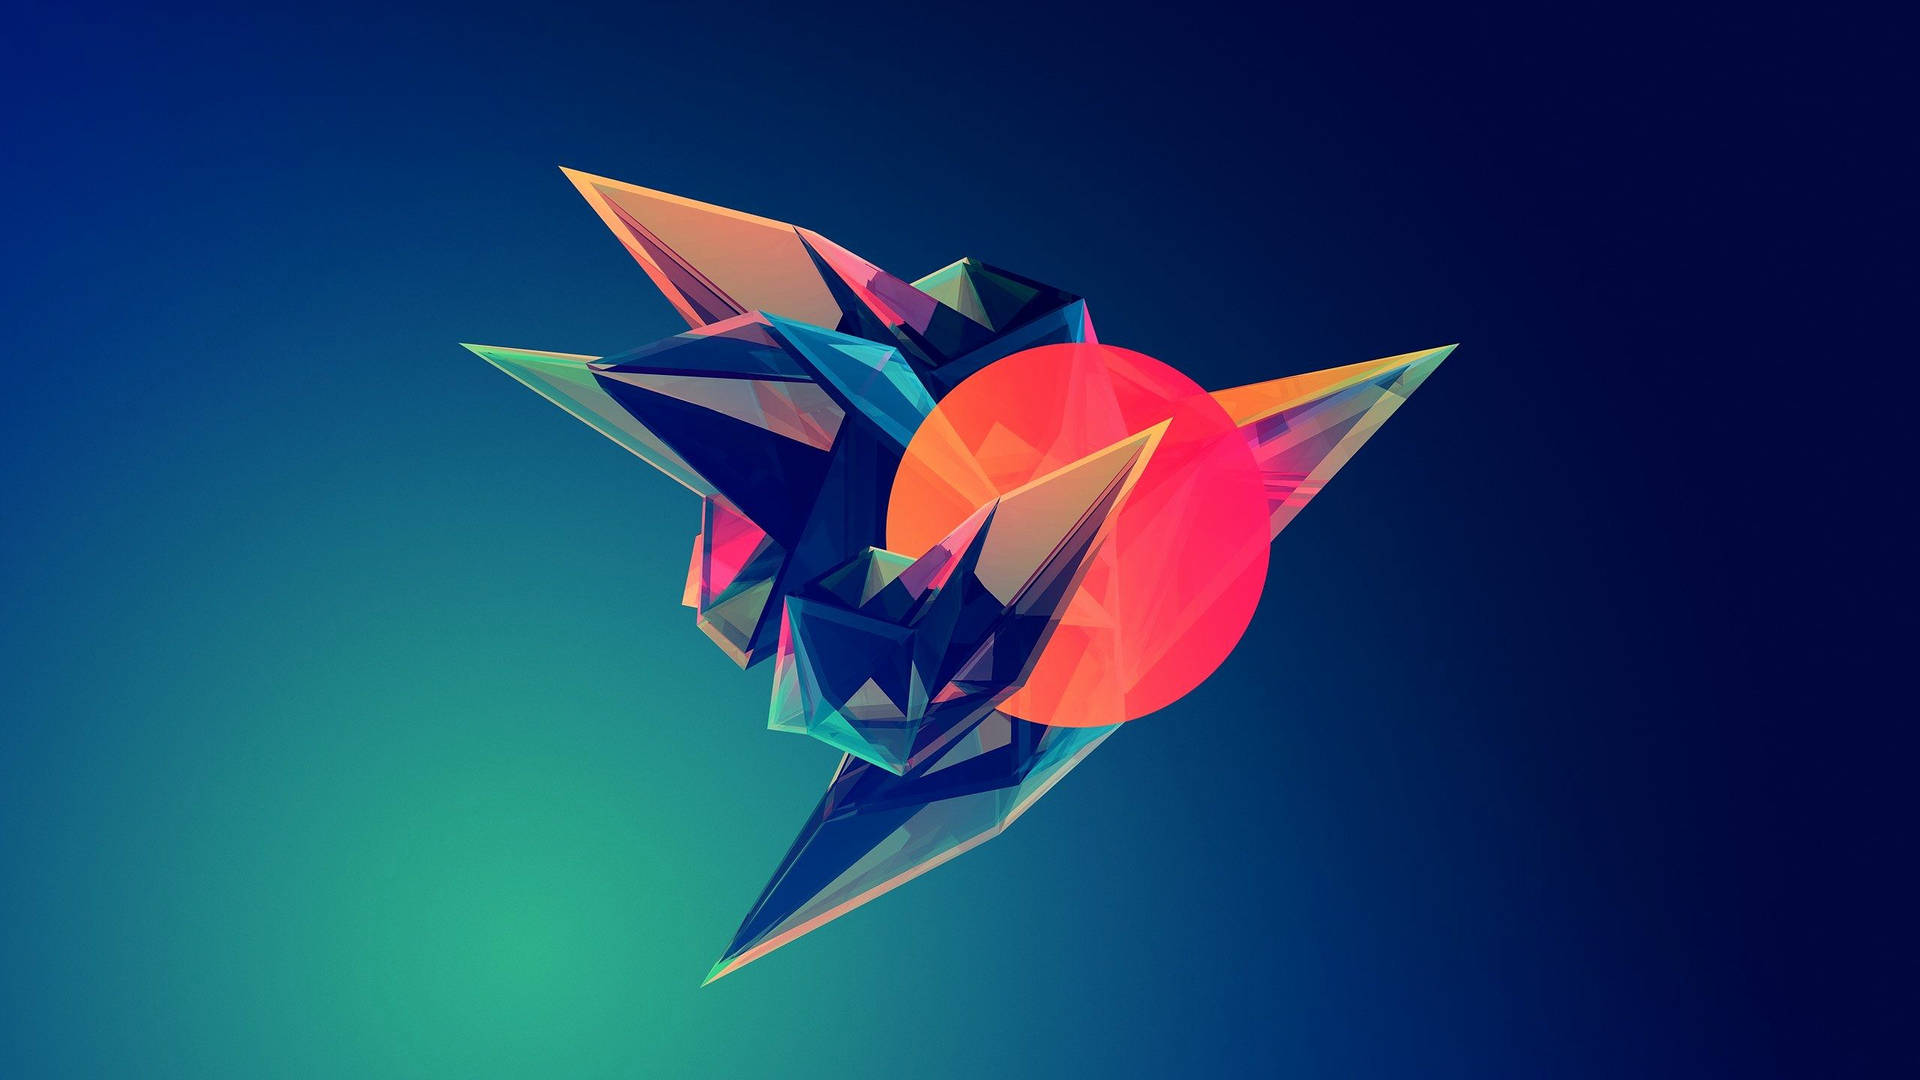 Low Poly Origami